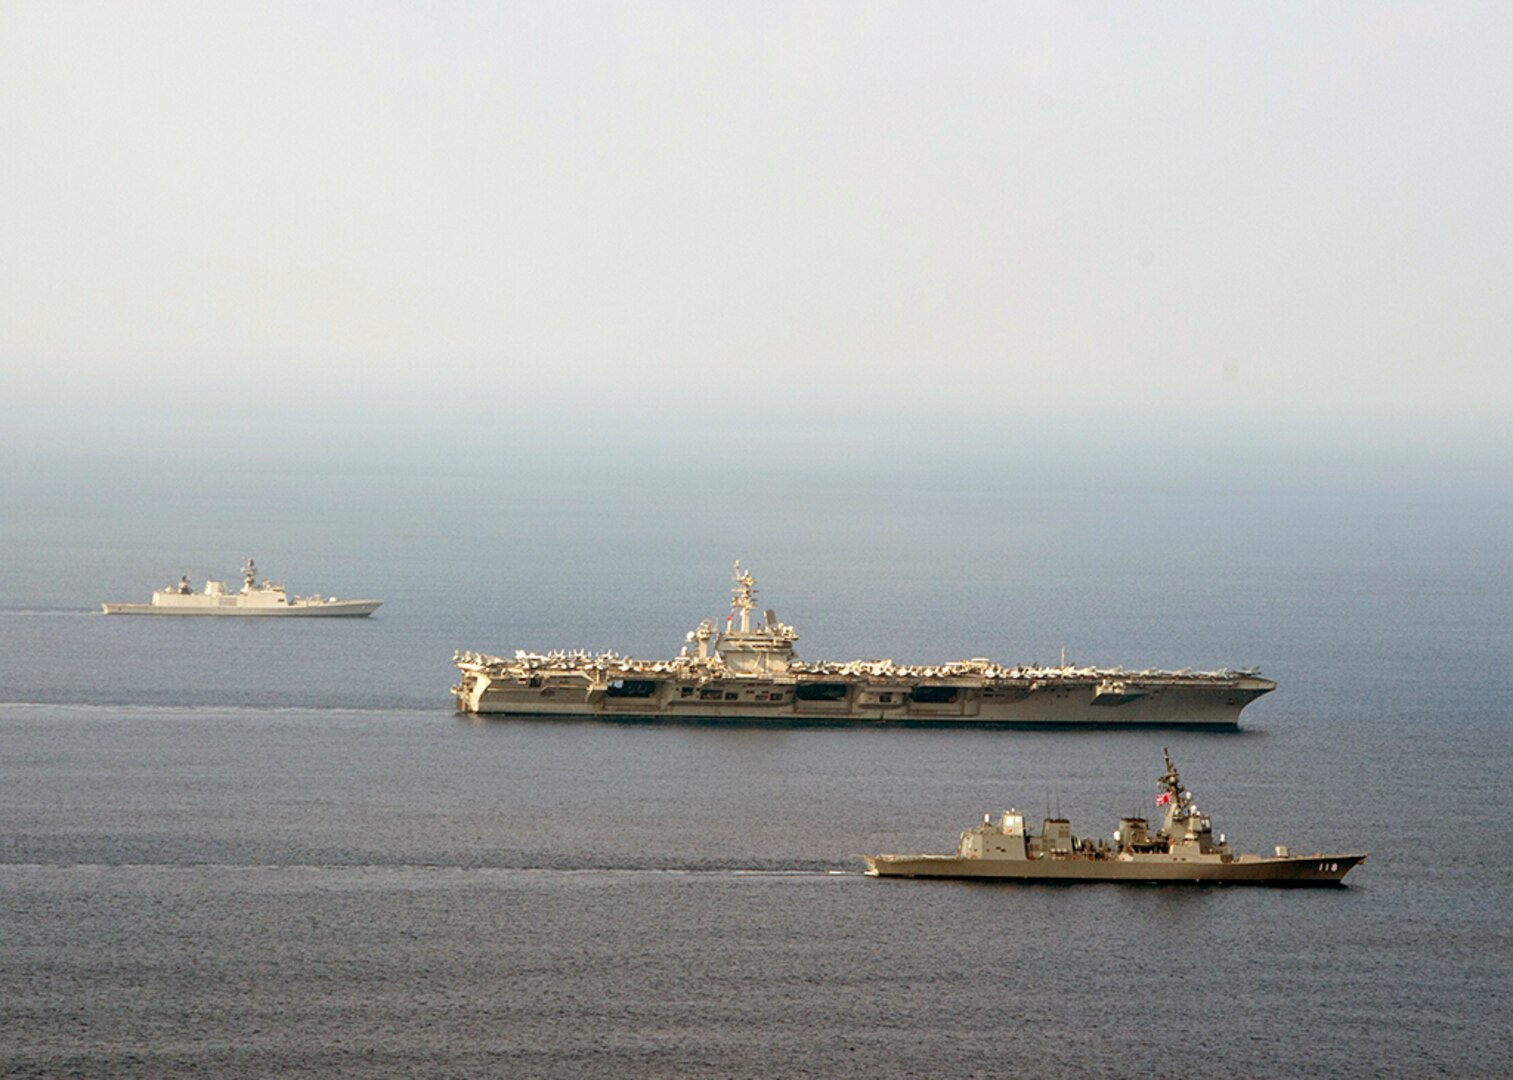 U.S. Navy official File Photo: INDIAN OCEAN (Oct. 16, 2015) The aircraft carrier USS Theodore Roosevelt (CVN 71), Japanese Maritime Self-Defense destroyer Fuyuzuki and Indian Shivalik-class frigate Shivalik transit into formation during a photo exercise as a part of Exercise Malabar 2015. Malabar is a continuing series of complex, high-end war fighting exercises conducted to advance multi-national maritime relationships and mutual security. Theodore Roosevelt is operating in the U.S. 7th Fleet area of operations as part of a worldwide deployment en route toits new homeport in San Diego to complete a three-carrier homeport shift. 